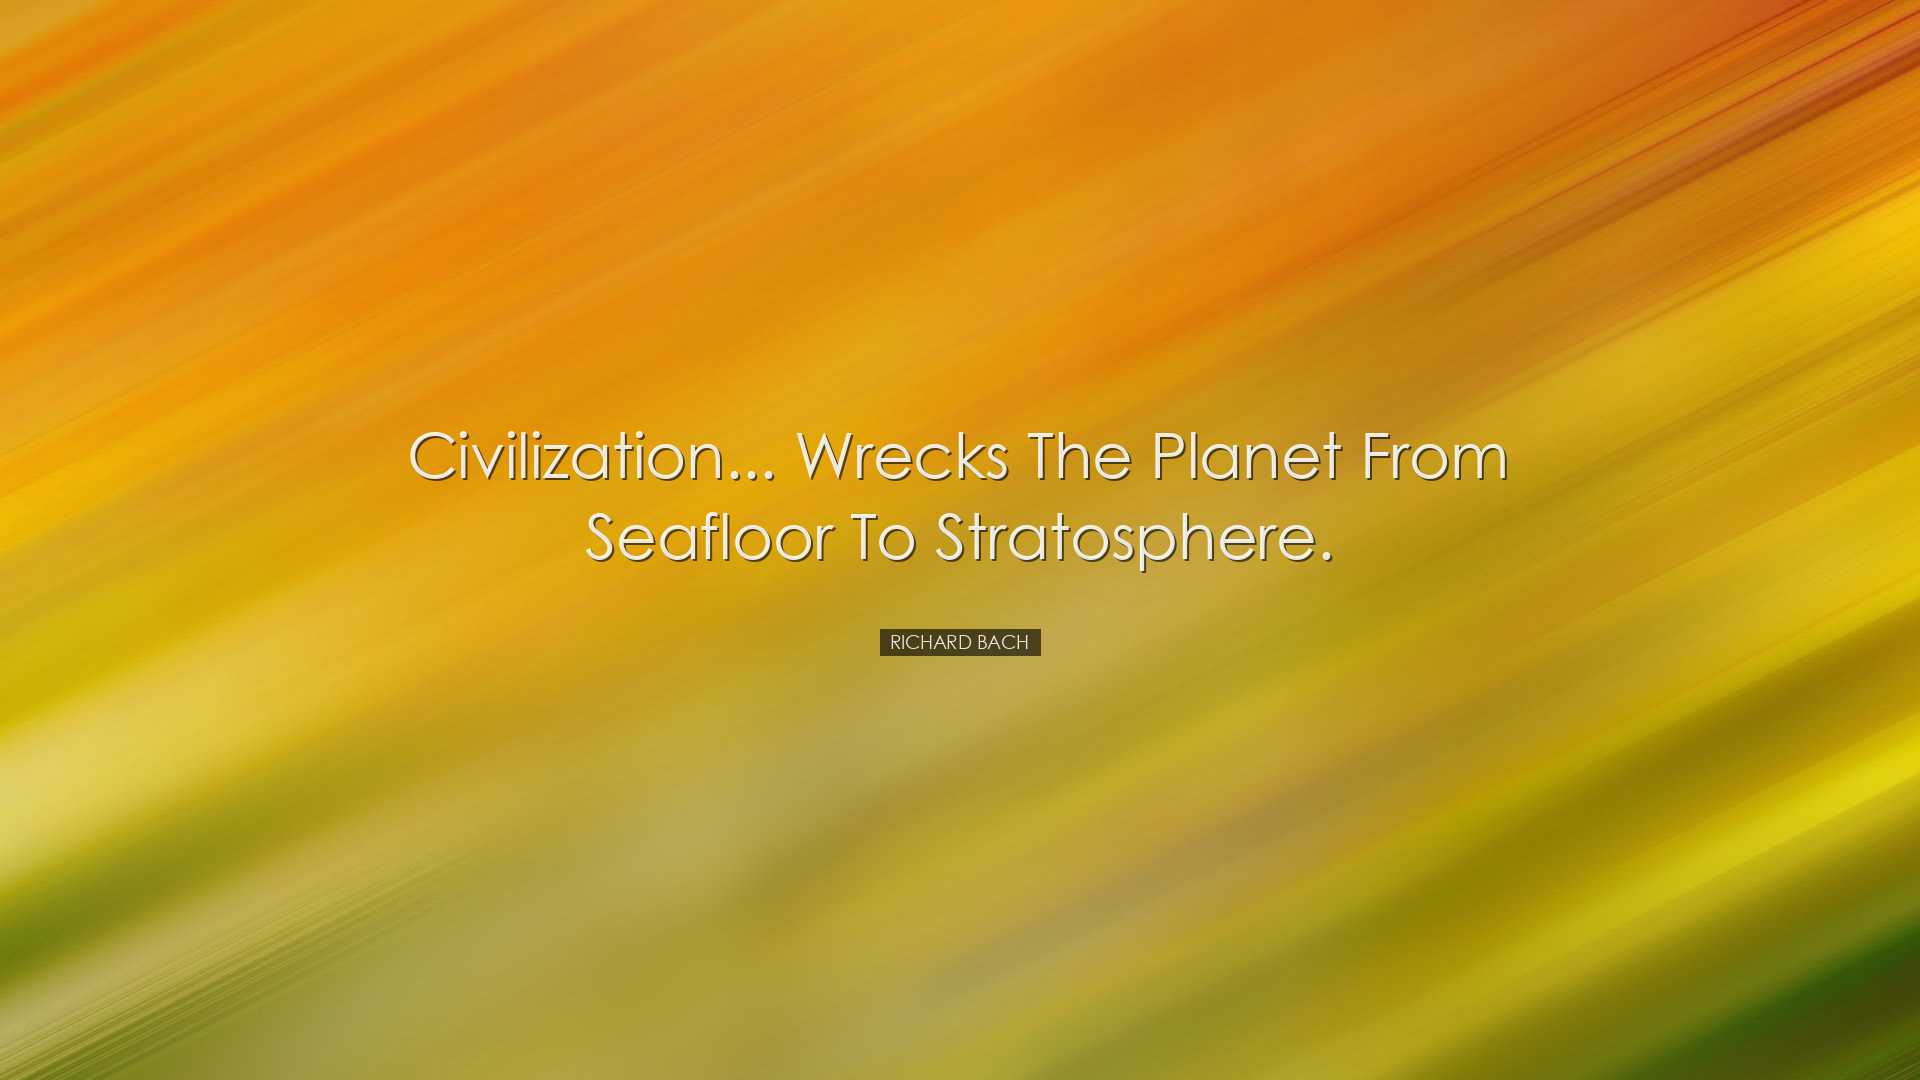 Civilization... wrecks the planet from seafloor to stratosphere. -